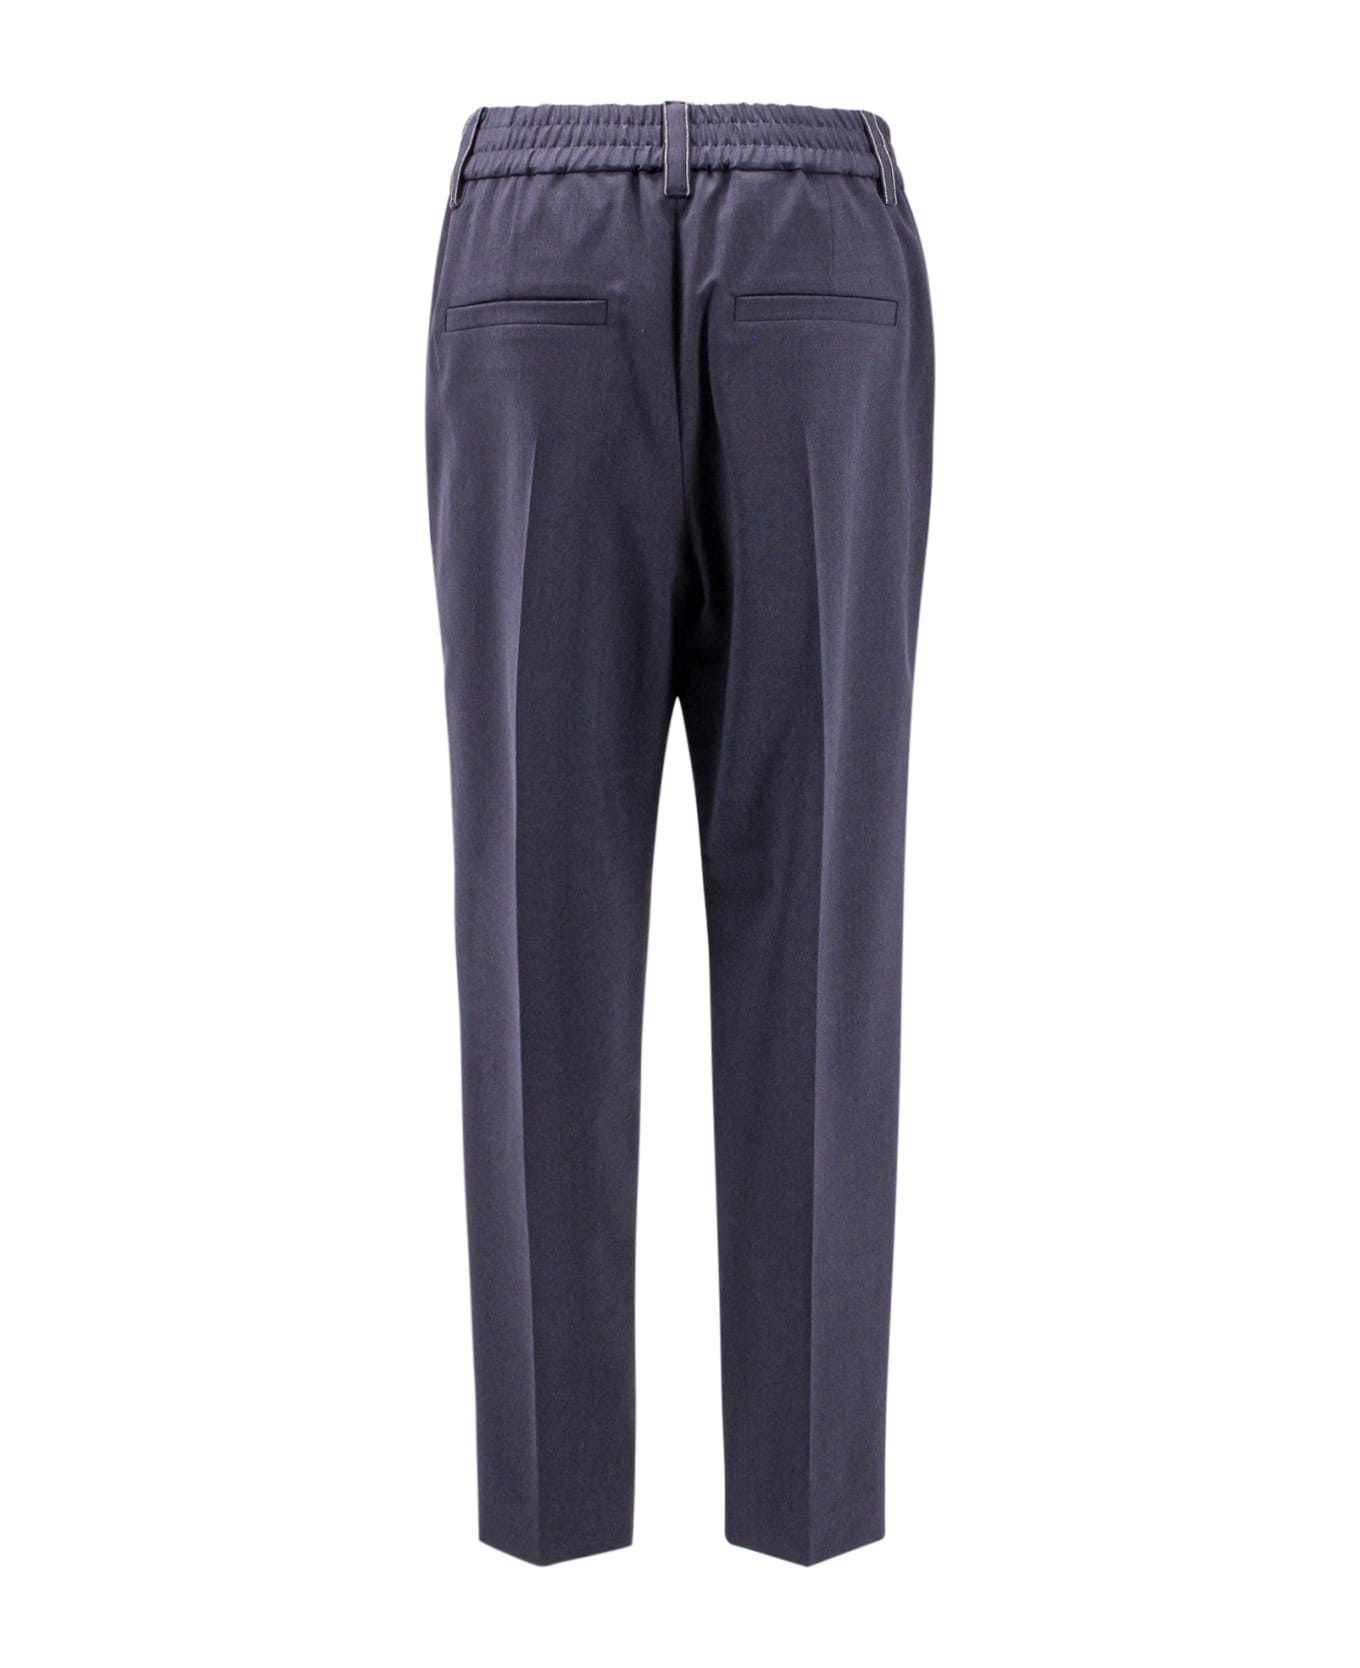 Brunello Cucinelli Trousers Made Of Fine Fresh Stretch Wool With Elastic Waistband And Side Welt Pockets - Blu ボトムス